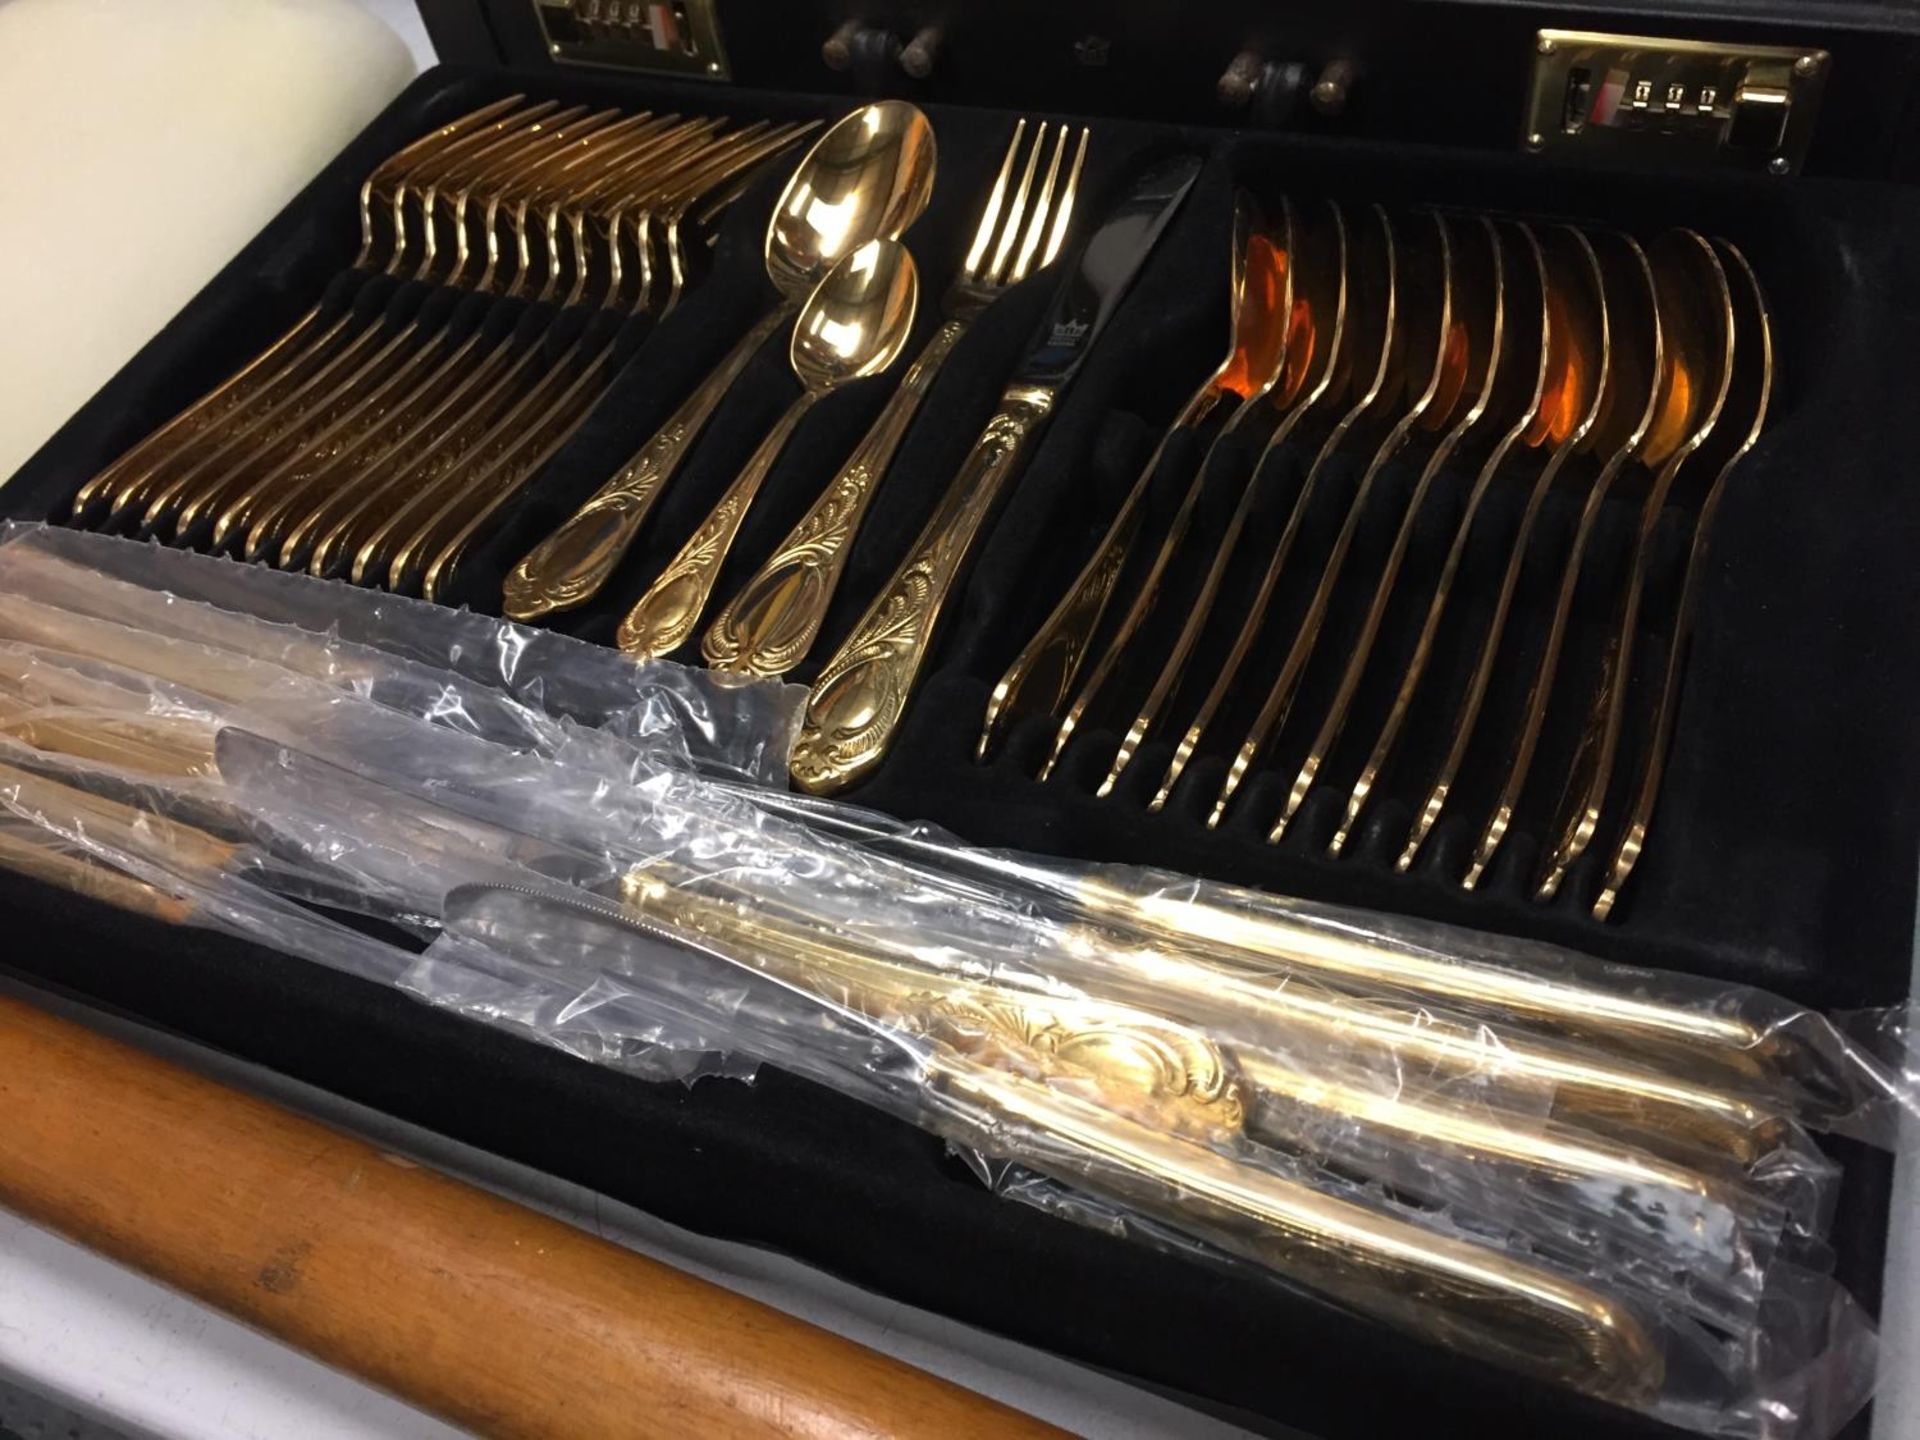 A TWELVE SETTING GOLD PLATED CANTEEN OF CUTLERY WITH SERVING SPOONS,LADELS, CAKE FORKS ETC IN A CASE - Image 4 of 5